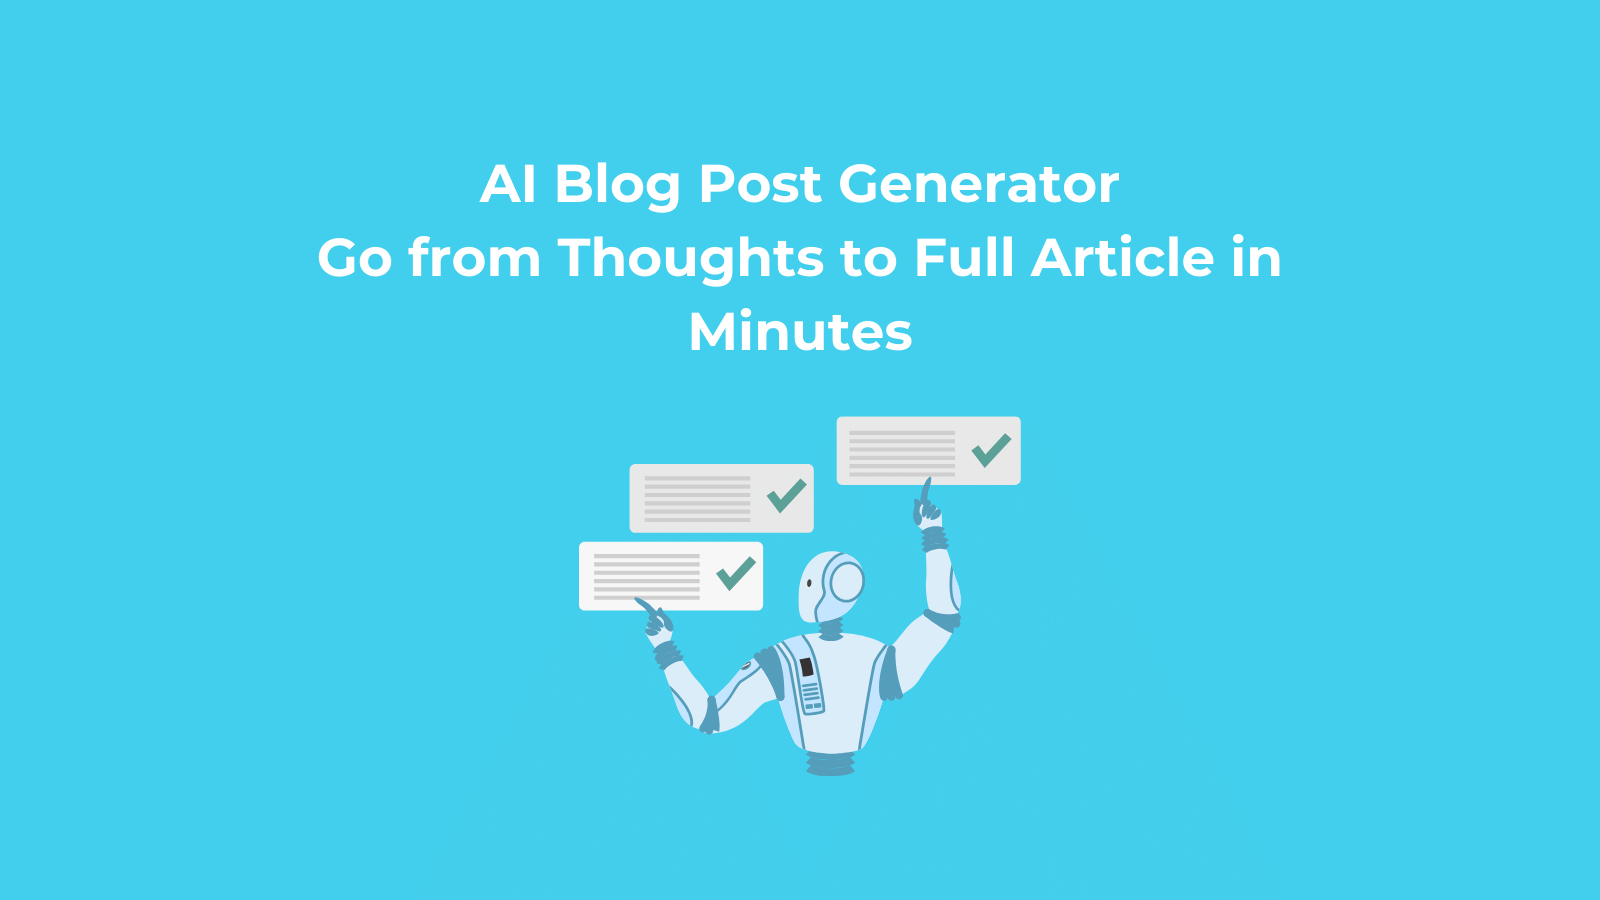 AI Blog Post Generator - Go from Thoughts to Full Article in Minutes